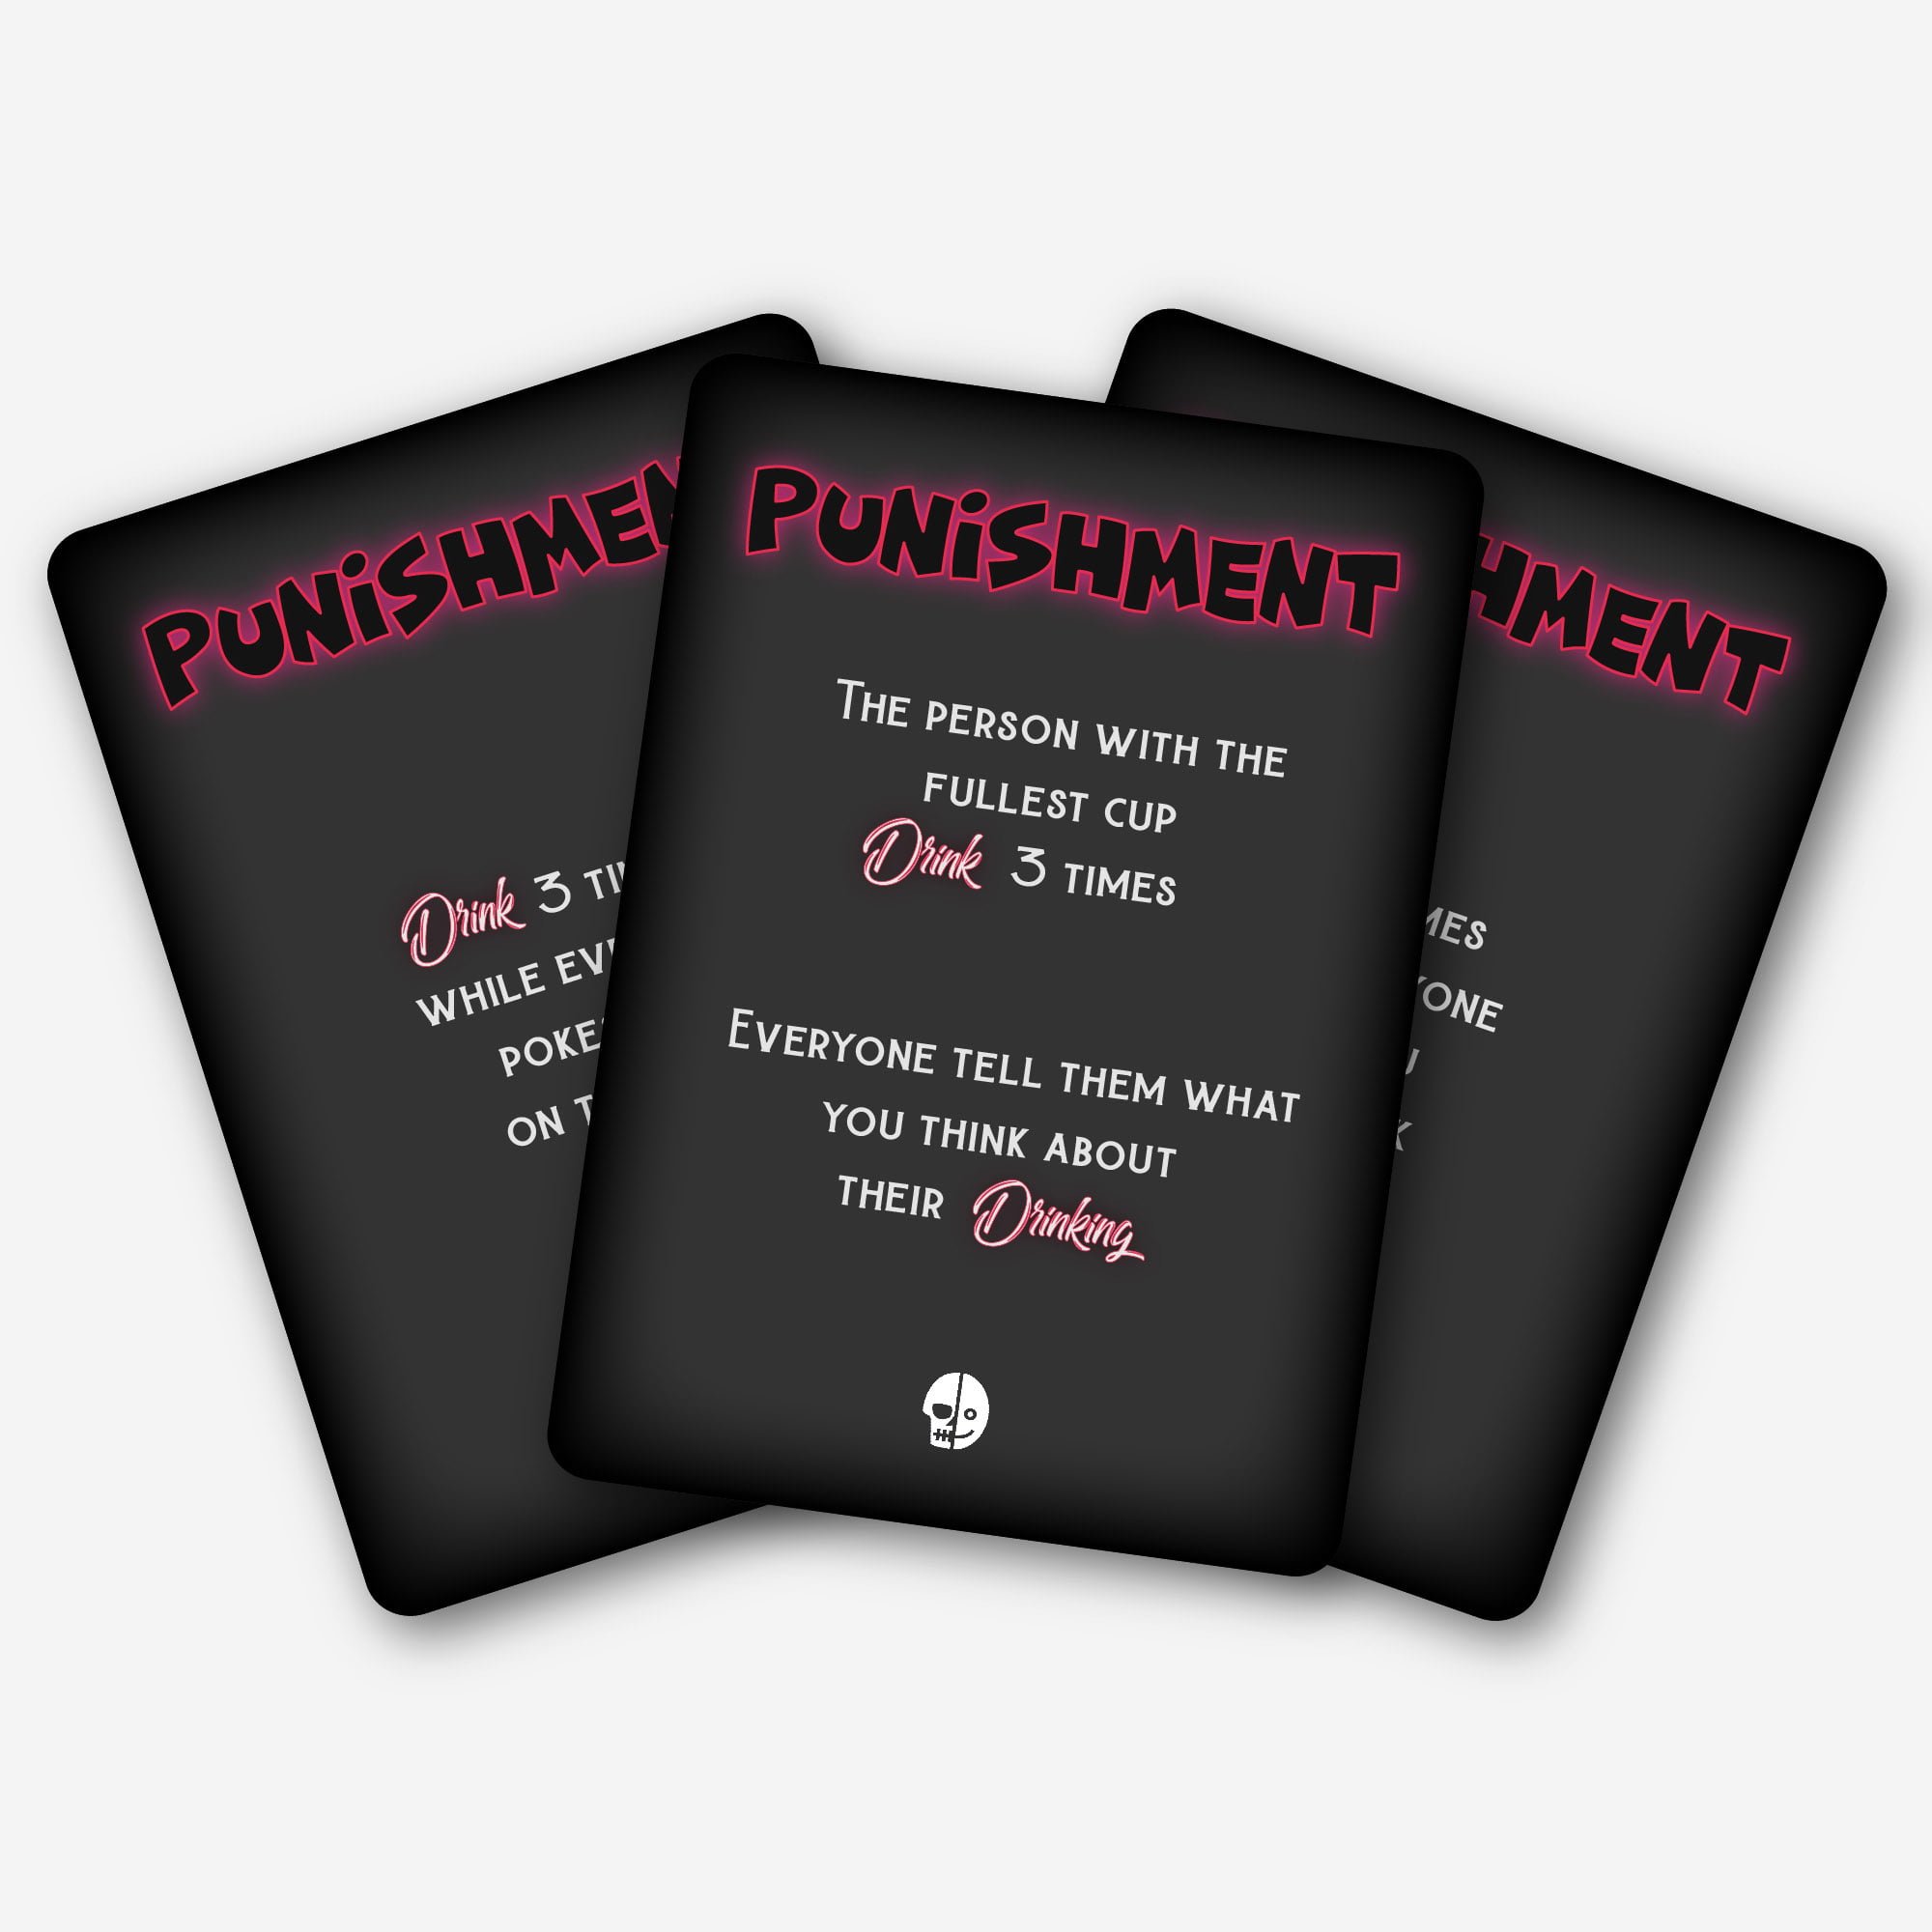 Punishment playing cards